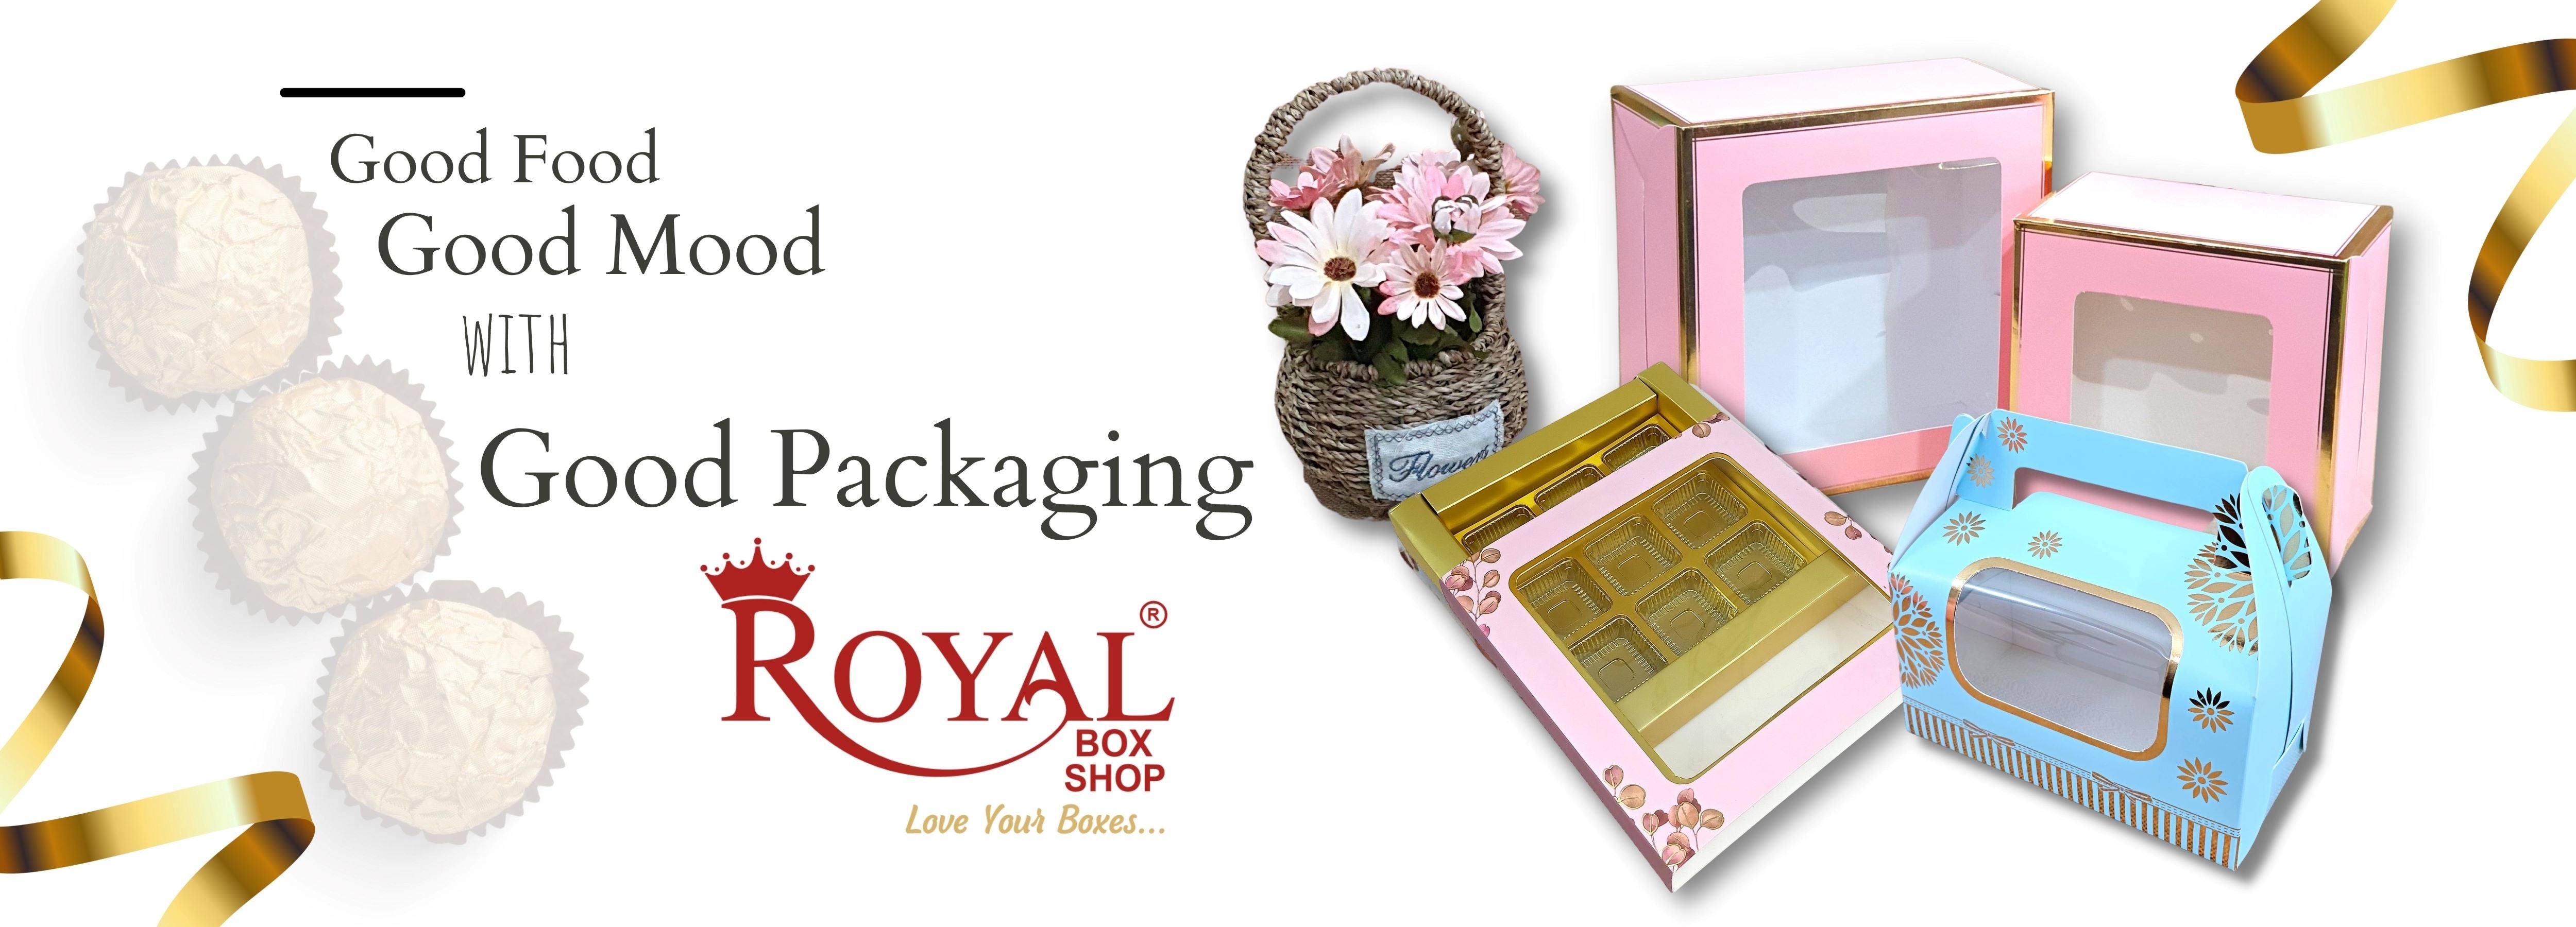 Fancy Wedding Boxes - Red Wedding Box Manufacturer from New Delhi